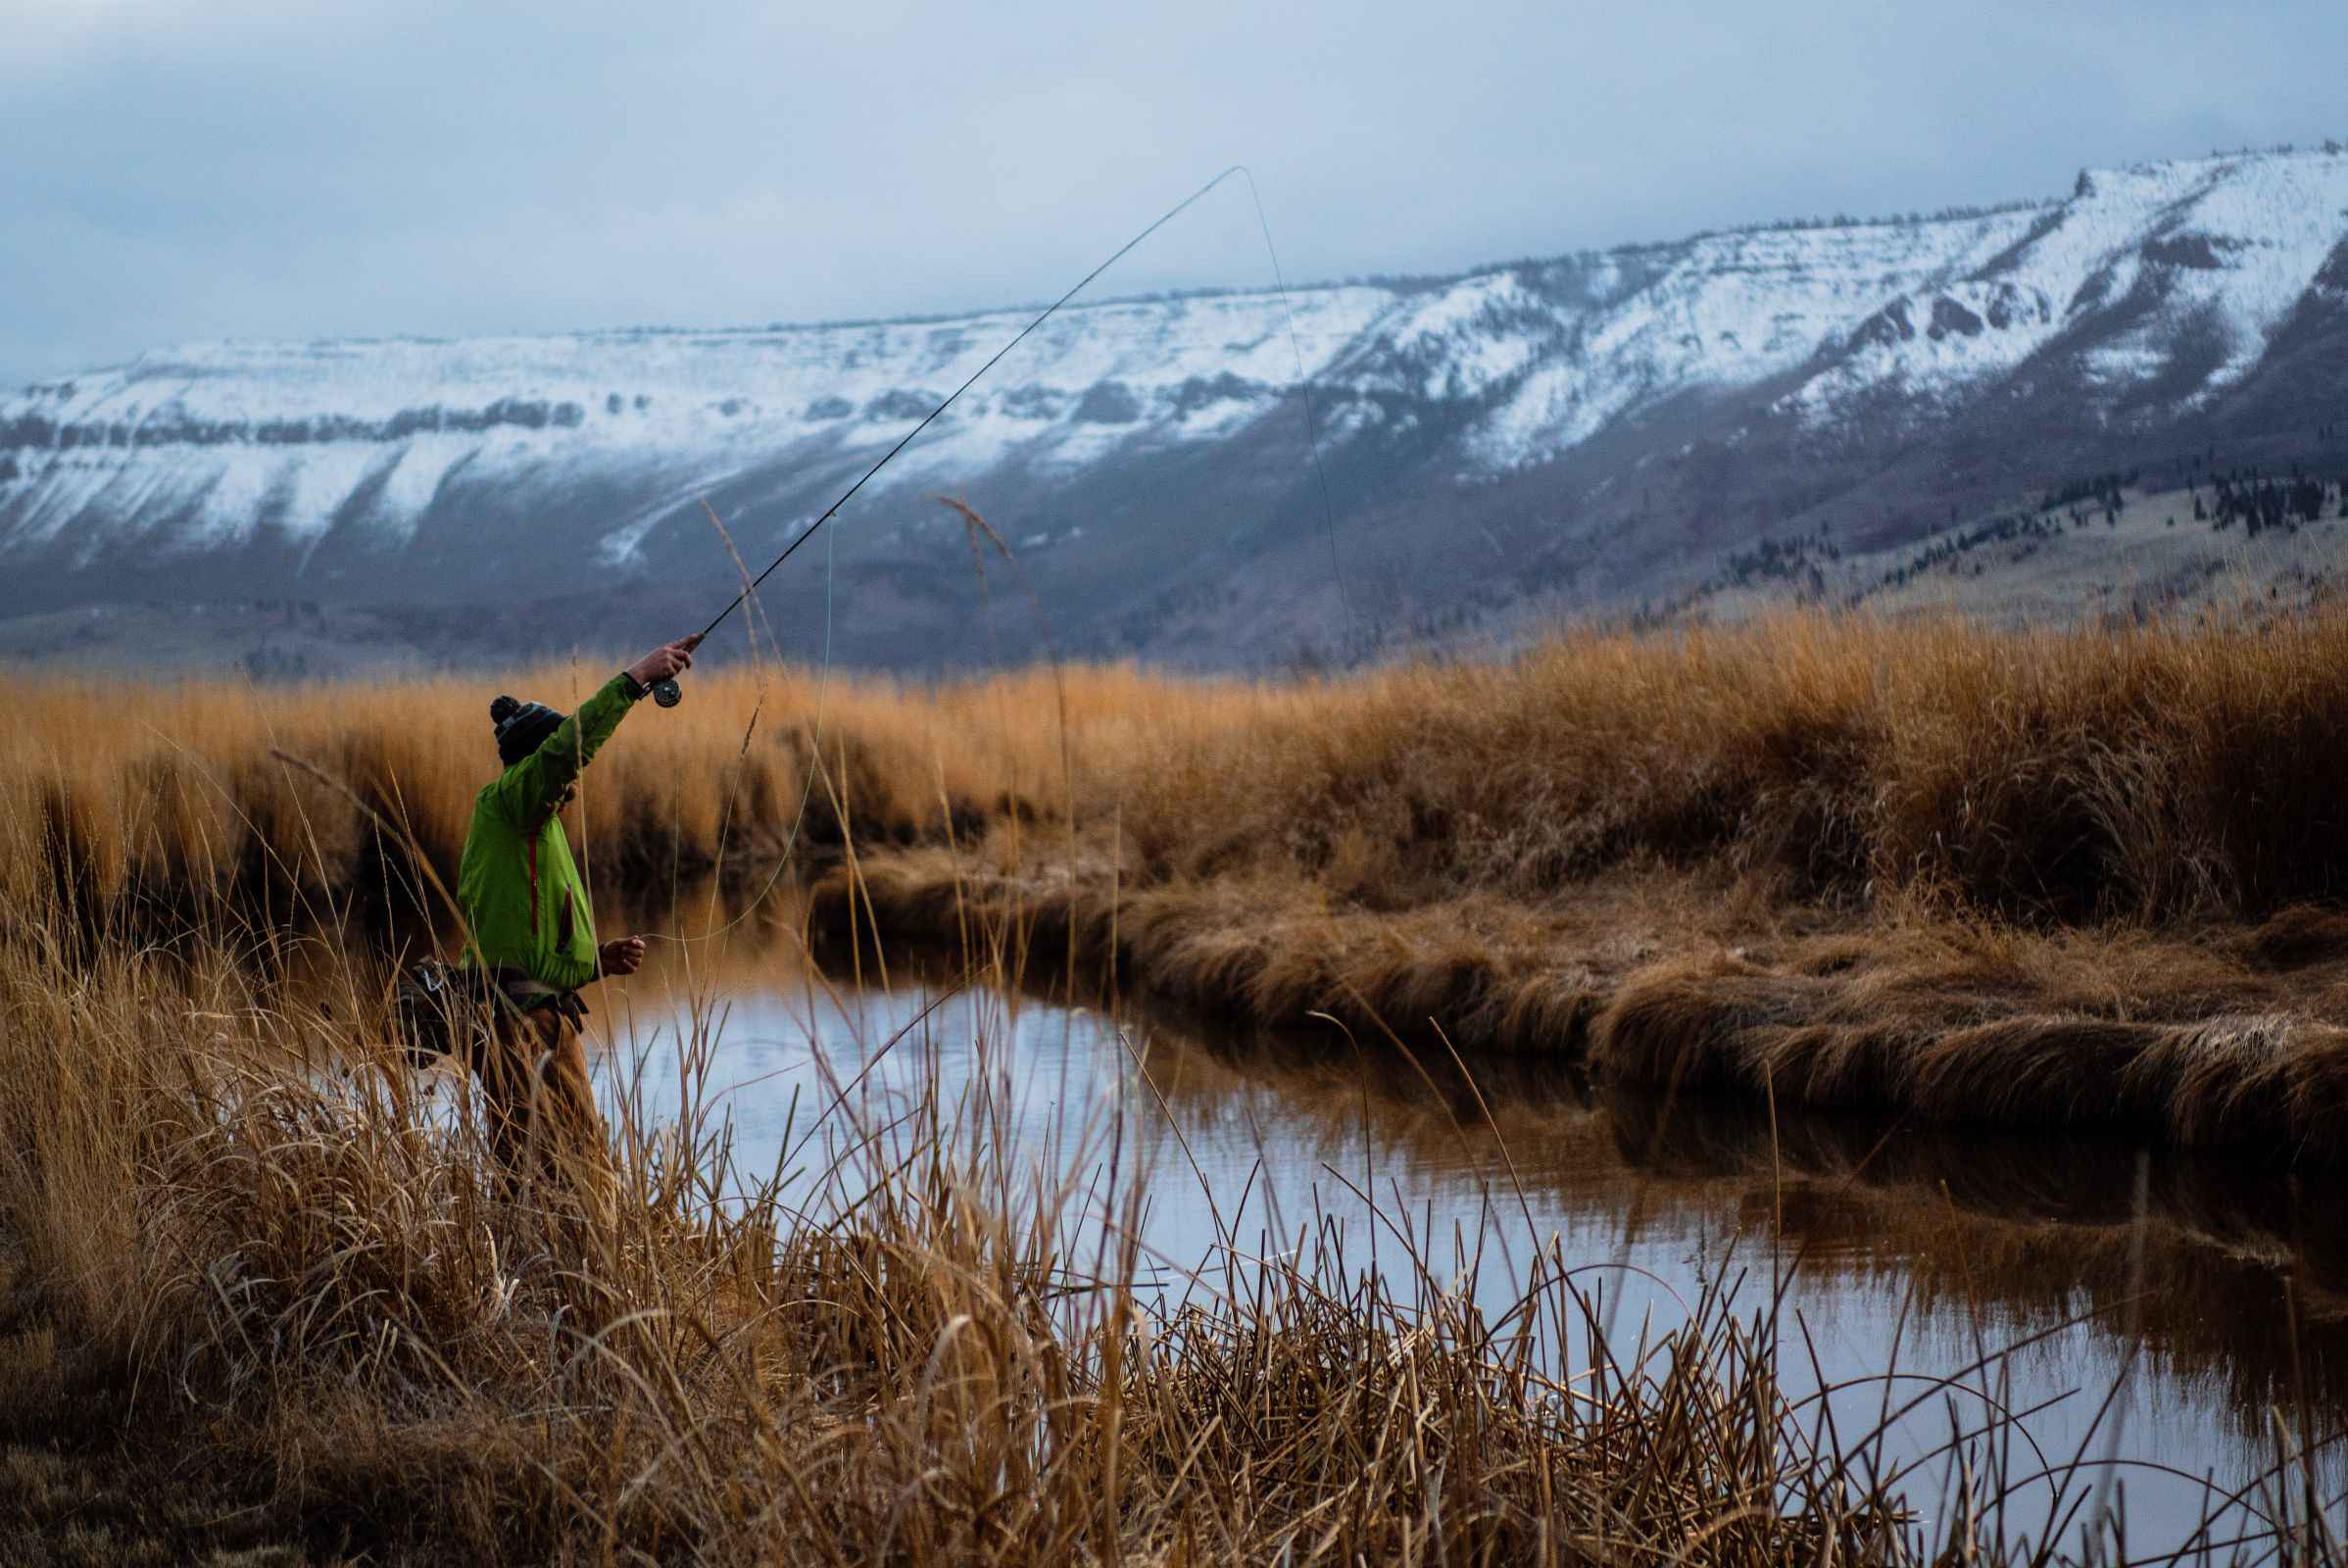 Winter Fly Fishing Tips